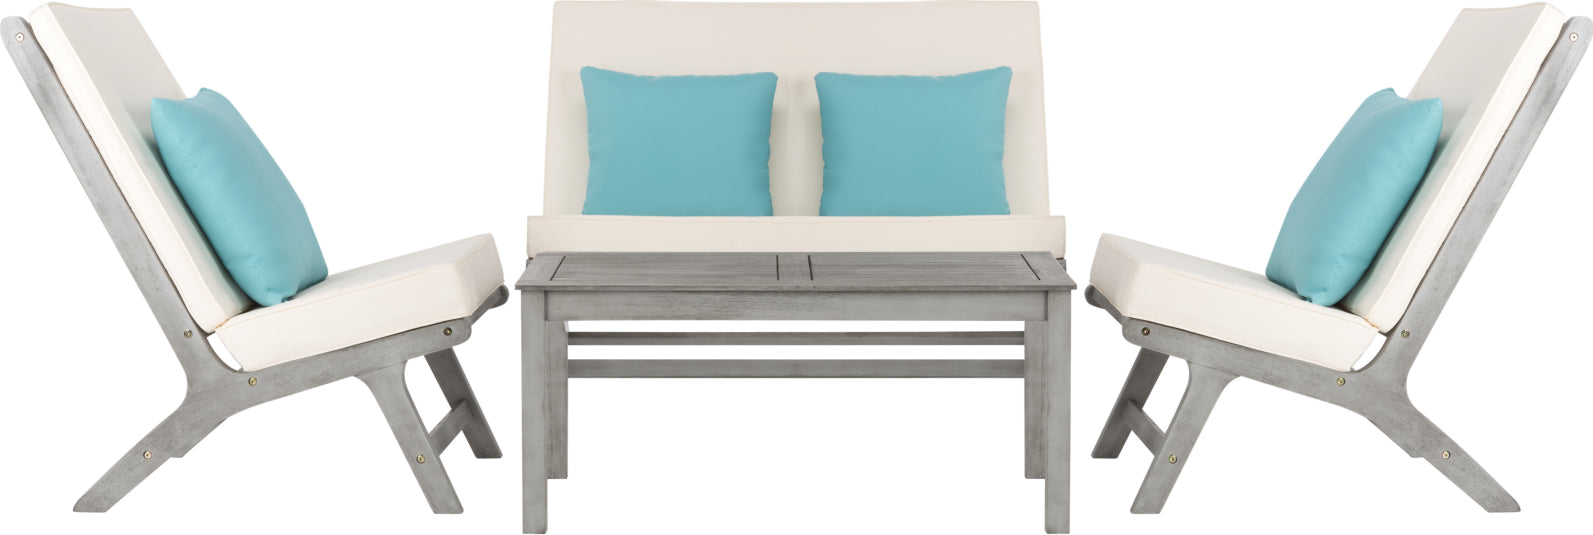 Safavieh Chaston 4 Pc Outdoor Living Set With Accent Pillows Grey Wash/White/Light Blue Furniture main image